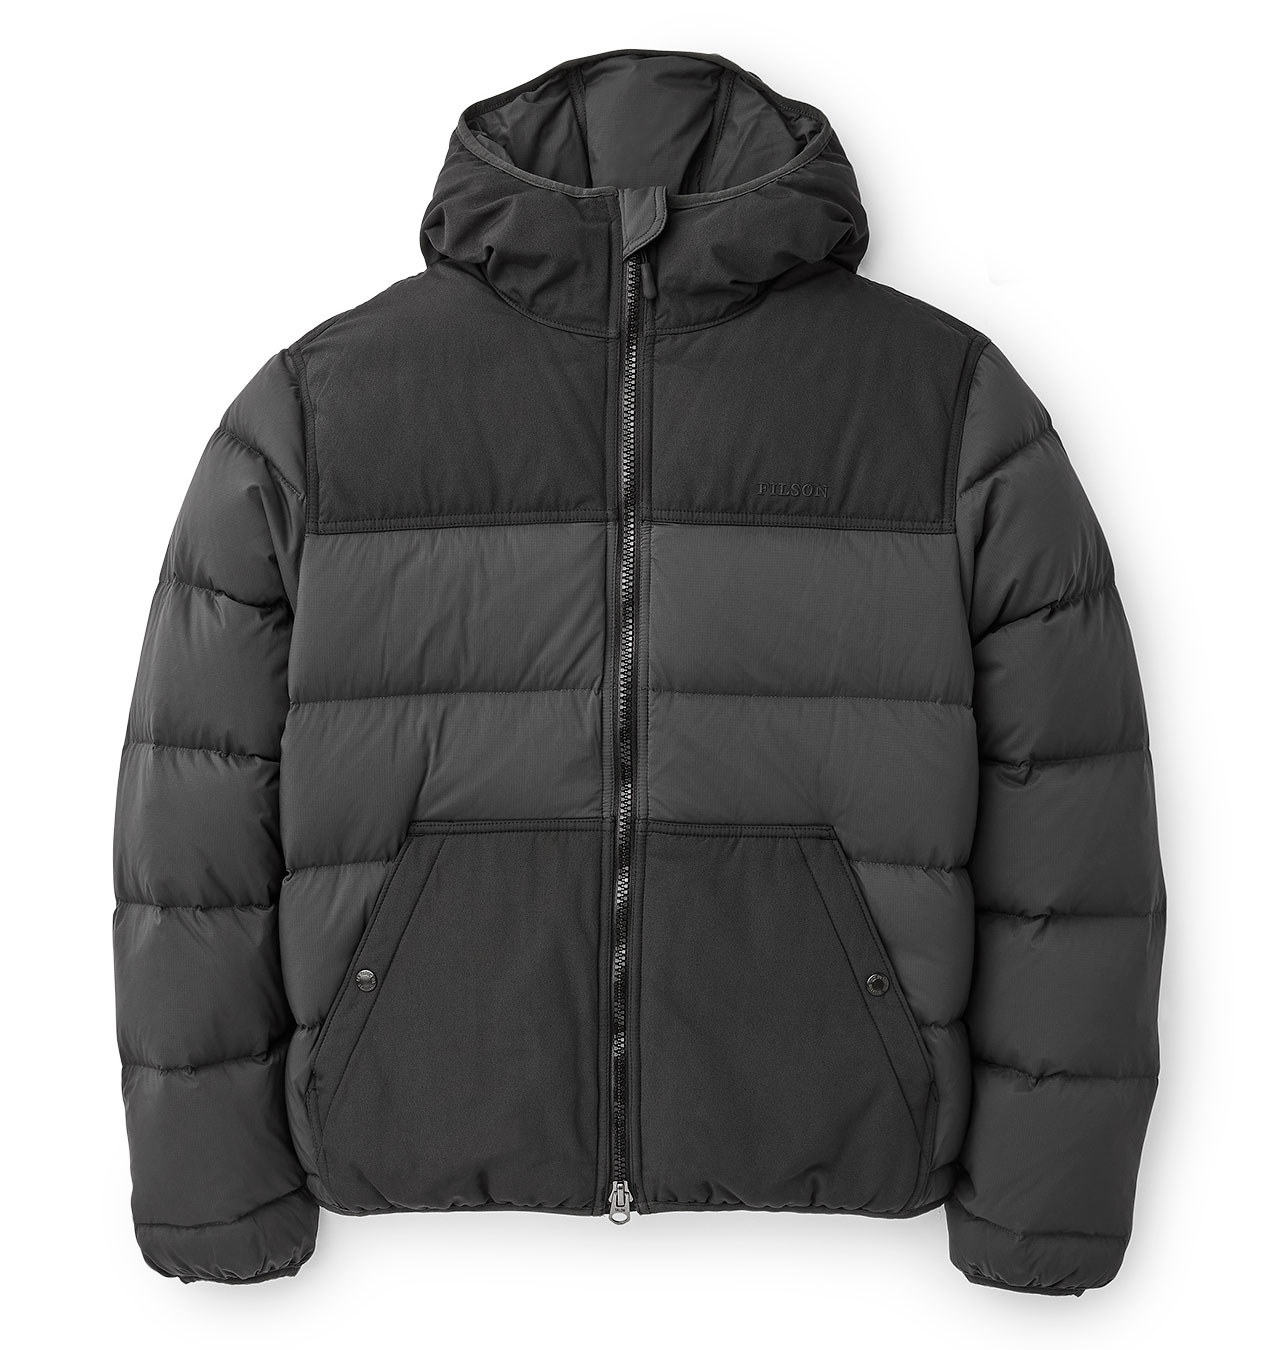 Filson - Featherweight Down Jacket - Faded Black